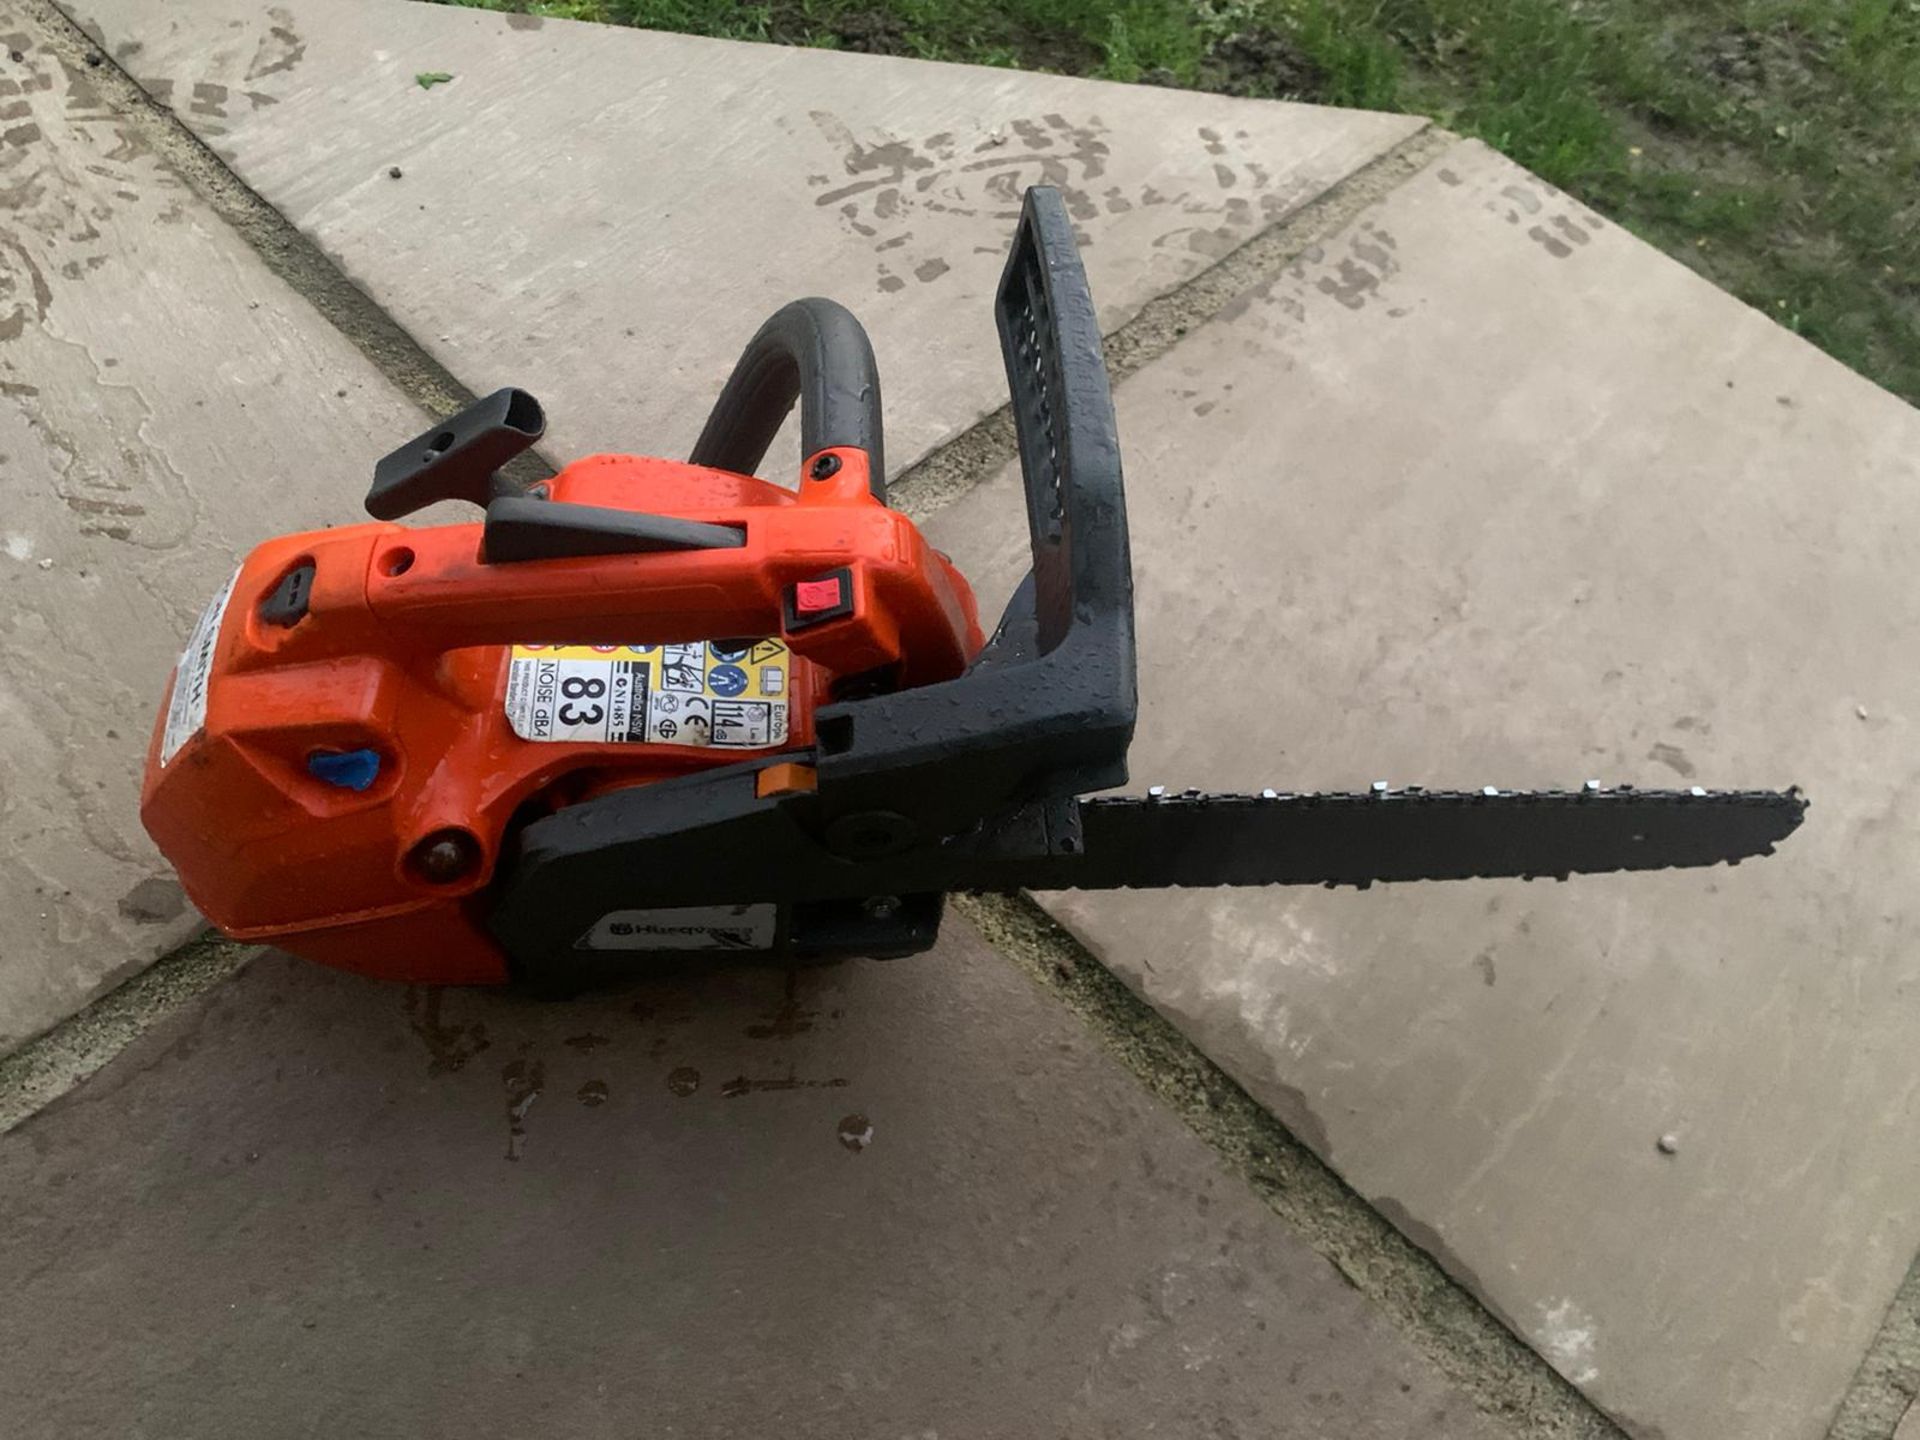 HUSQUVARNA T435 TOP HANDLE CHAINSAW, RUNS AND WORKS, GOOD CONDITION, C/W 12" BAR & CHAIN, 12" COVER - Image 3 of 4